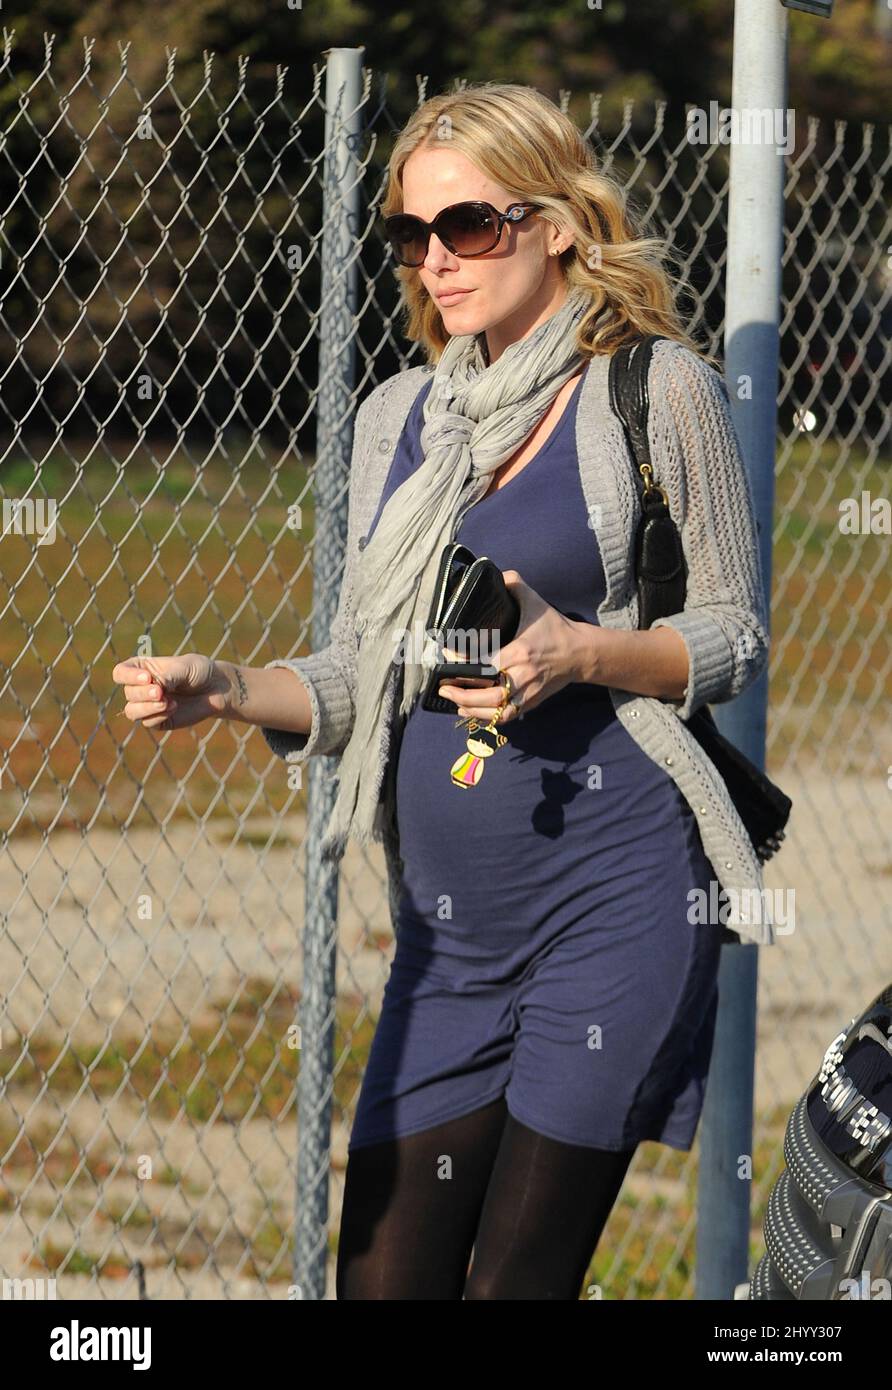 Monet Mazur looking very pregnant leaving the Byron and Tracey Salon, Los Angeles. Stock Photo